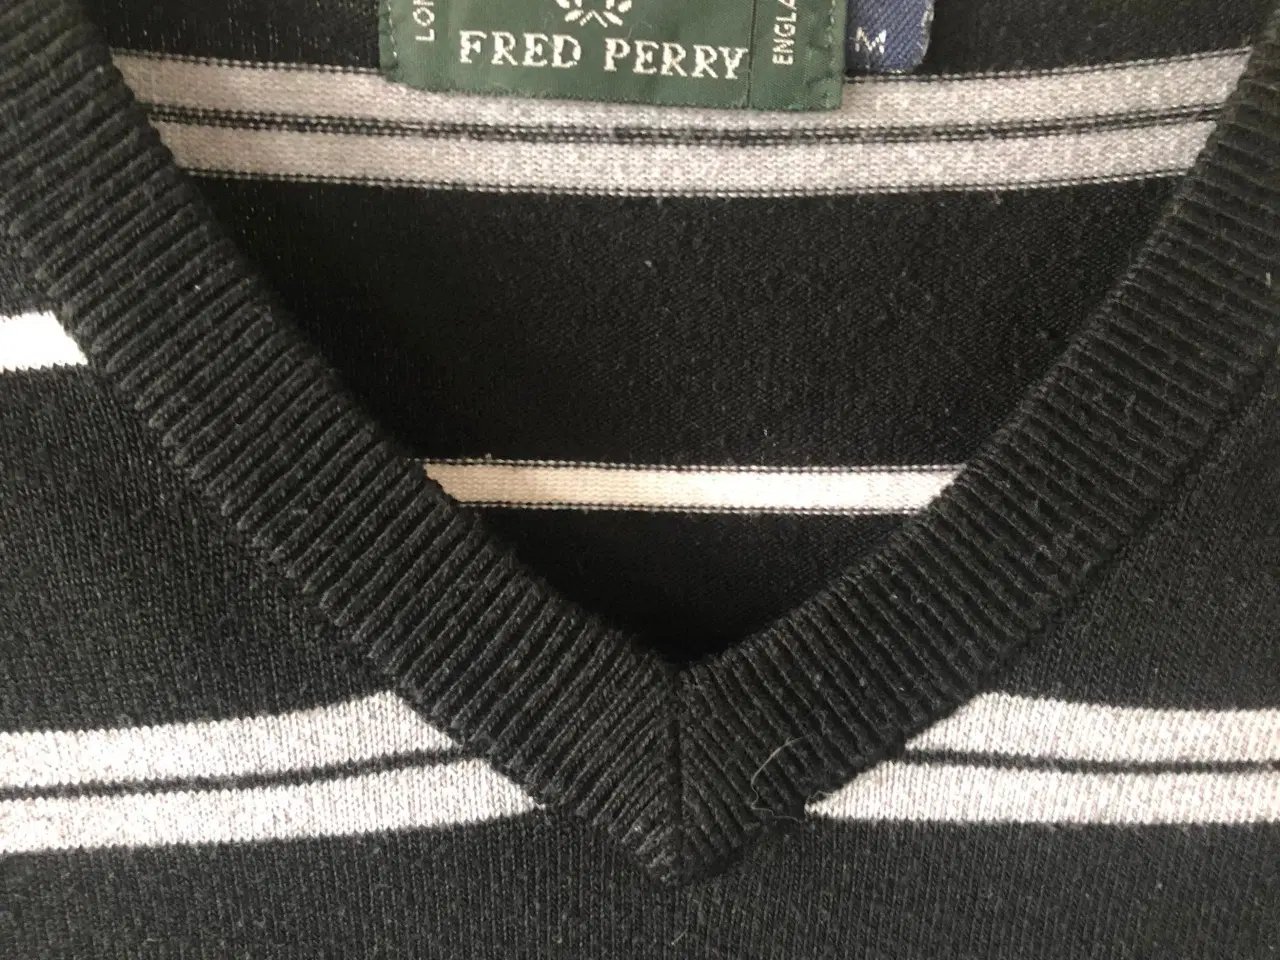 Billede 3 - Fred Perry pullover